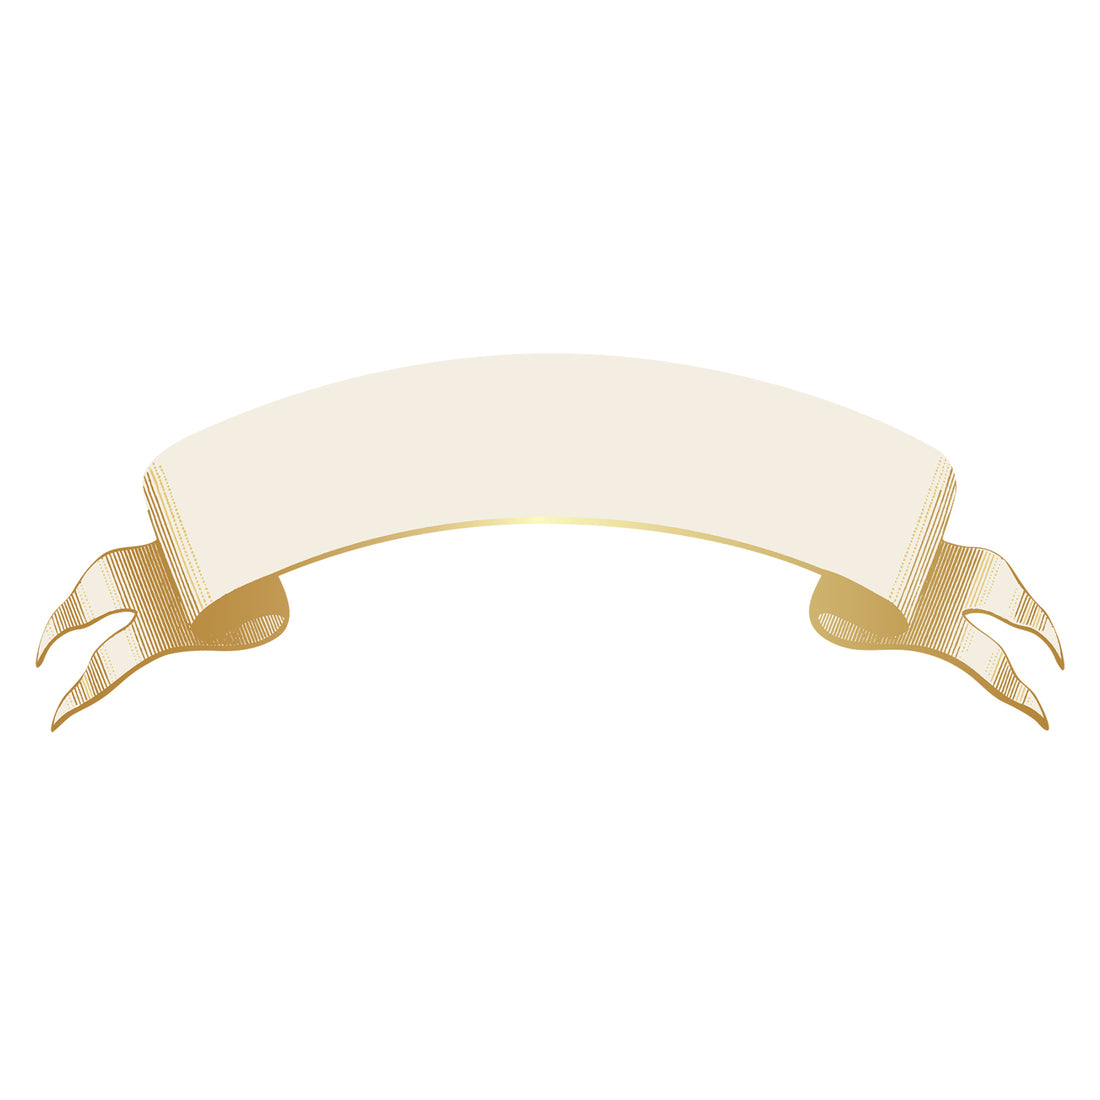 A die-cut white table accent in the shape of a billowing ribbon with gold foil engraving-style linework, perfect for personalizing your table setting.